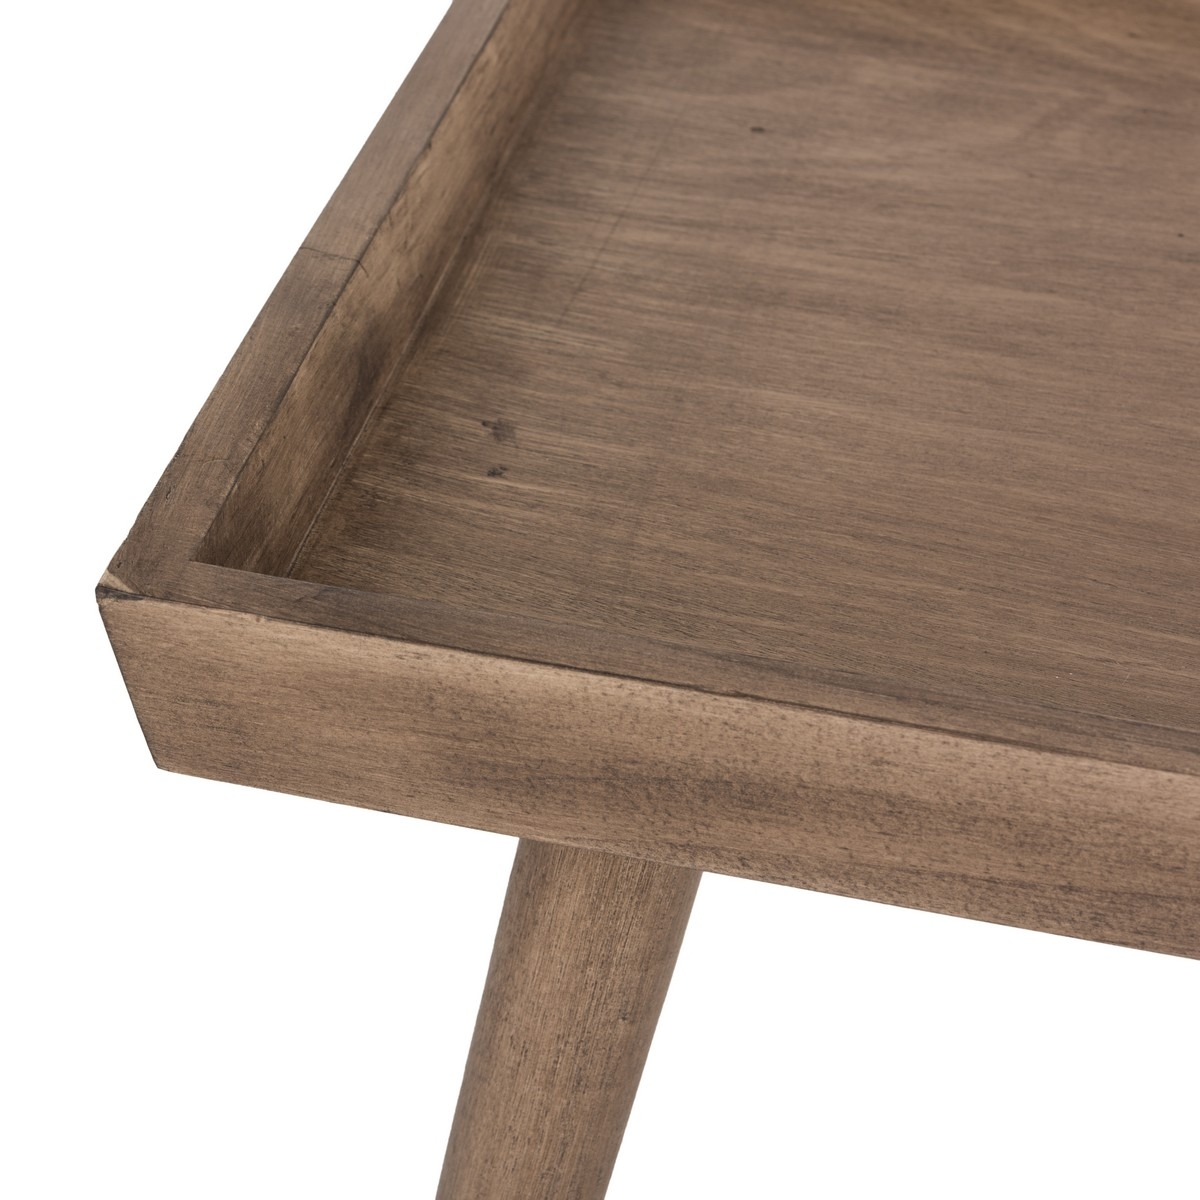 Nonie Coffee Table With Tray Top - Desert Brown - Arlo Home - Image 4